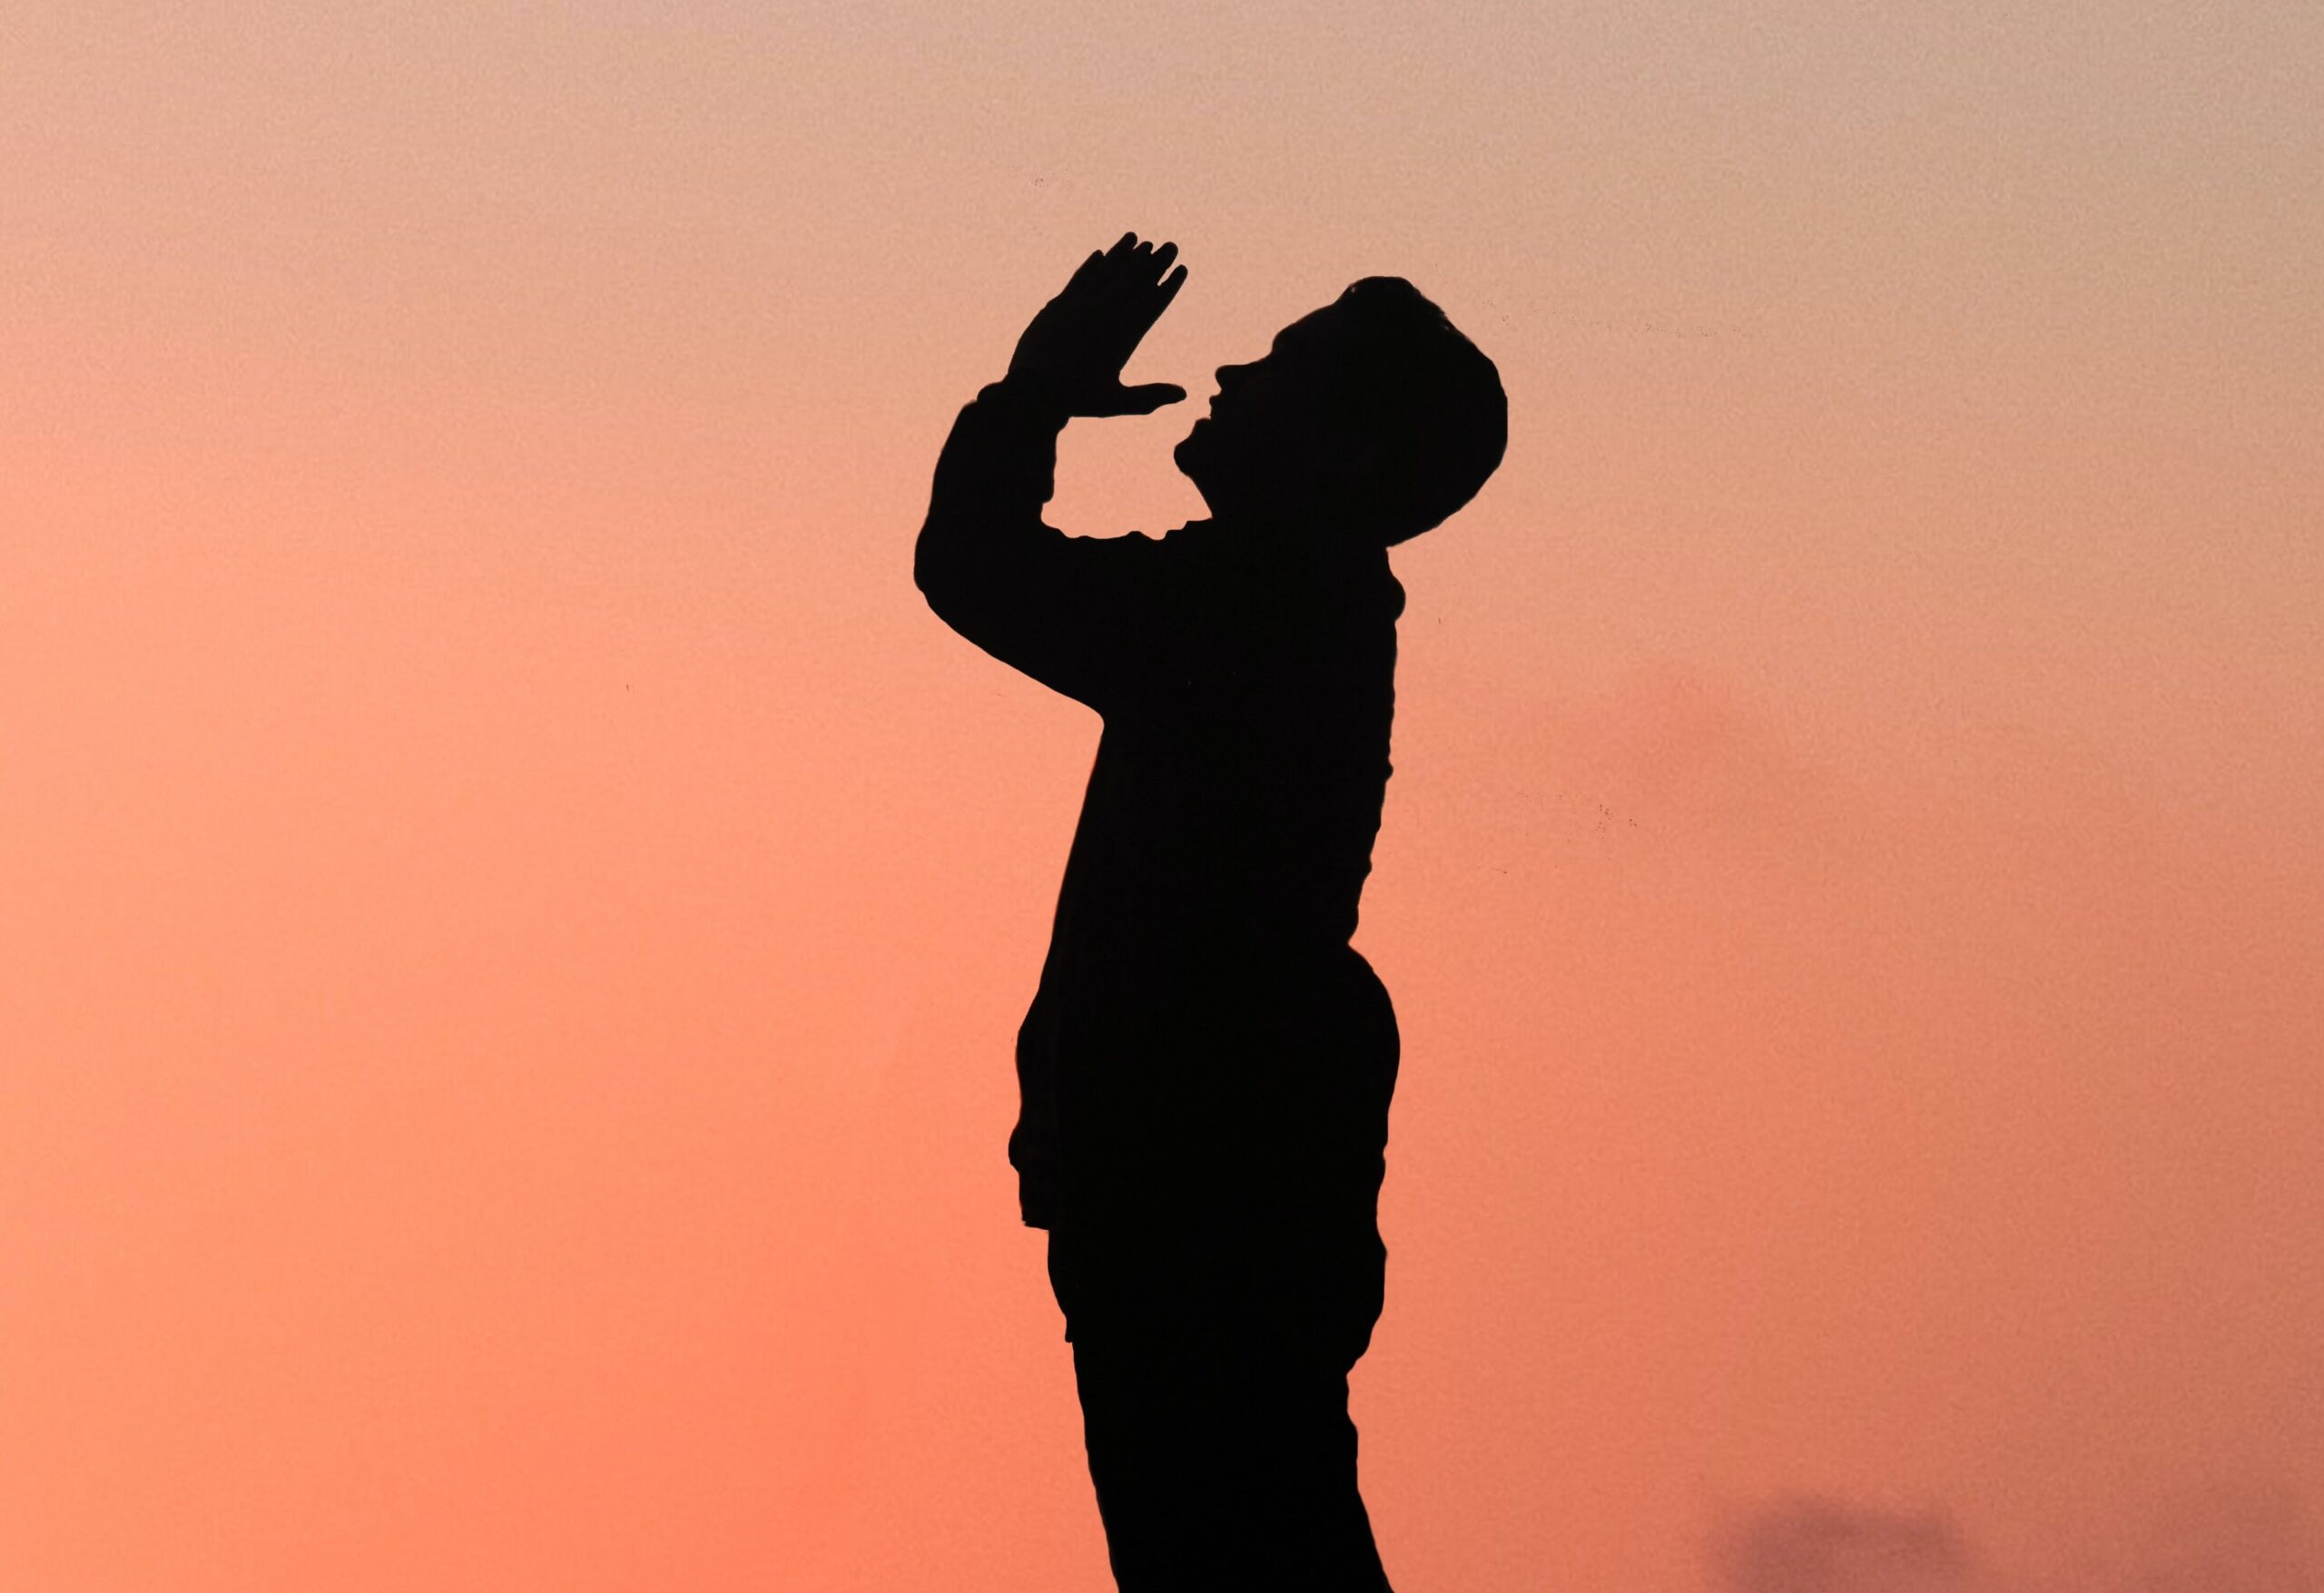 A side-profile silhouette of a man praying while looking up at the sky, the pink evening sky behind him.